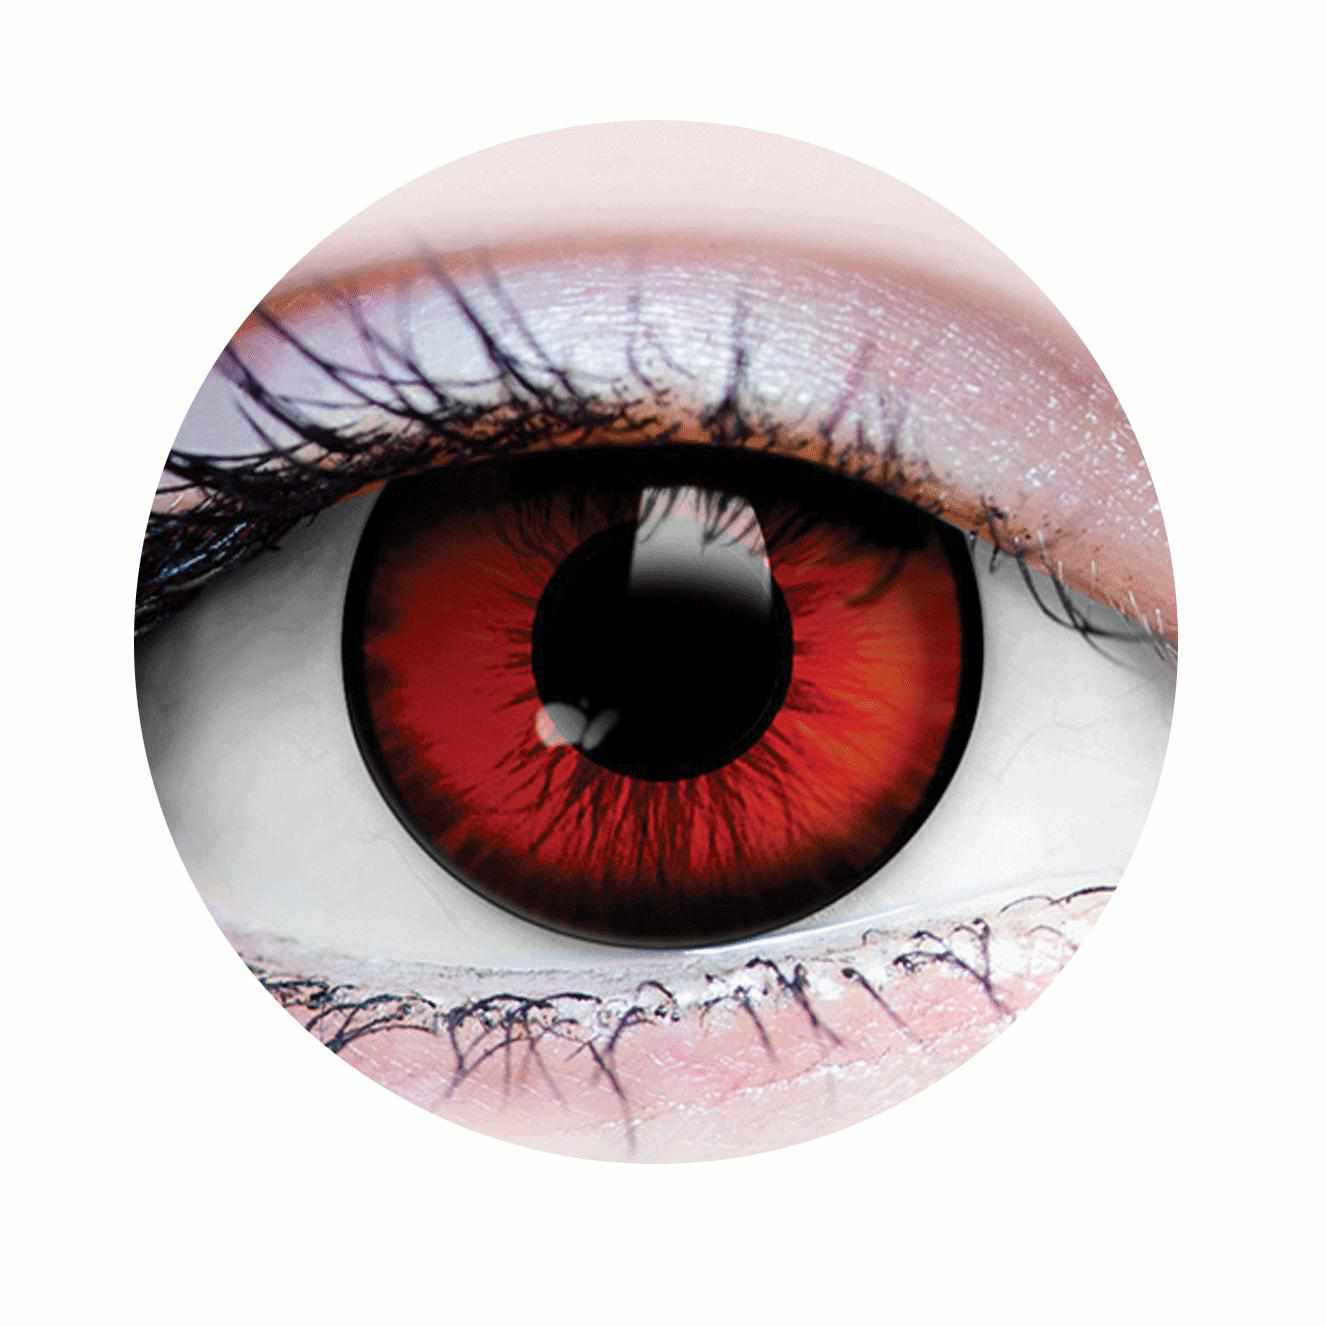 Anime  Video Game Inspired Cosplay Contact Lenses  Sharingan  Halloween  Zombie Contacts